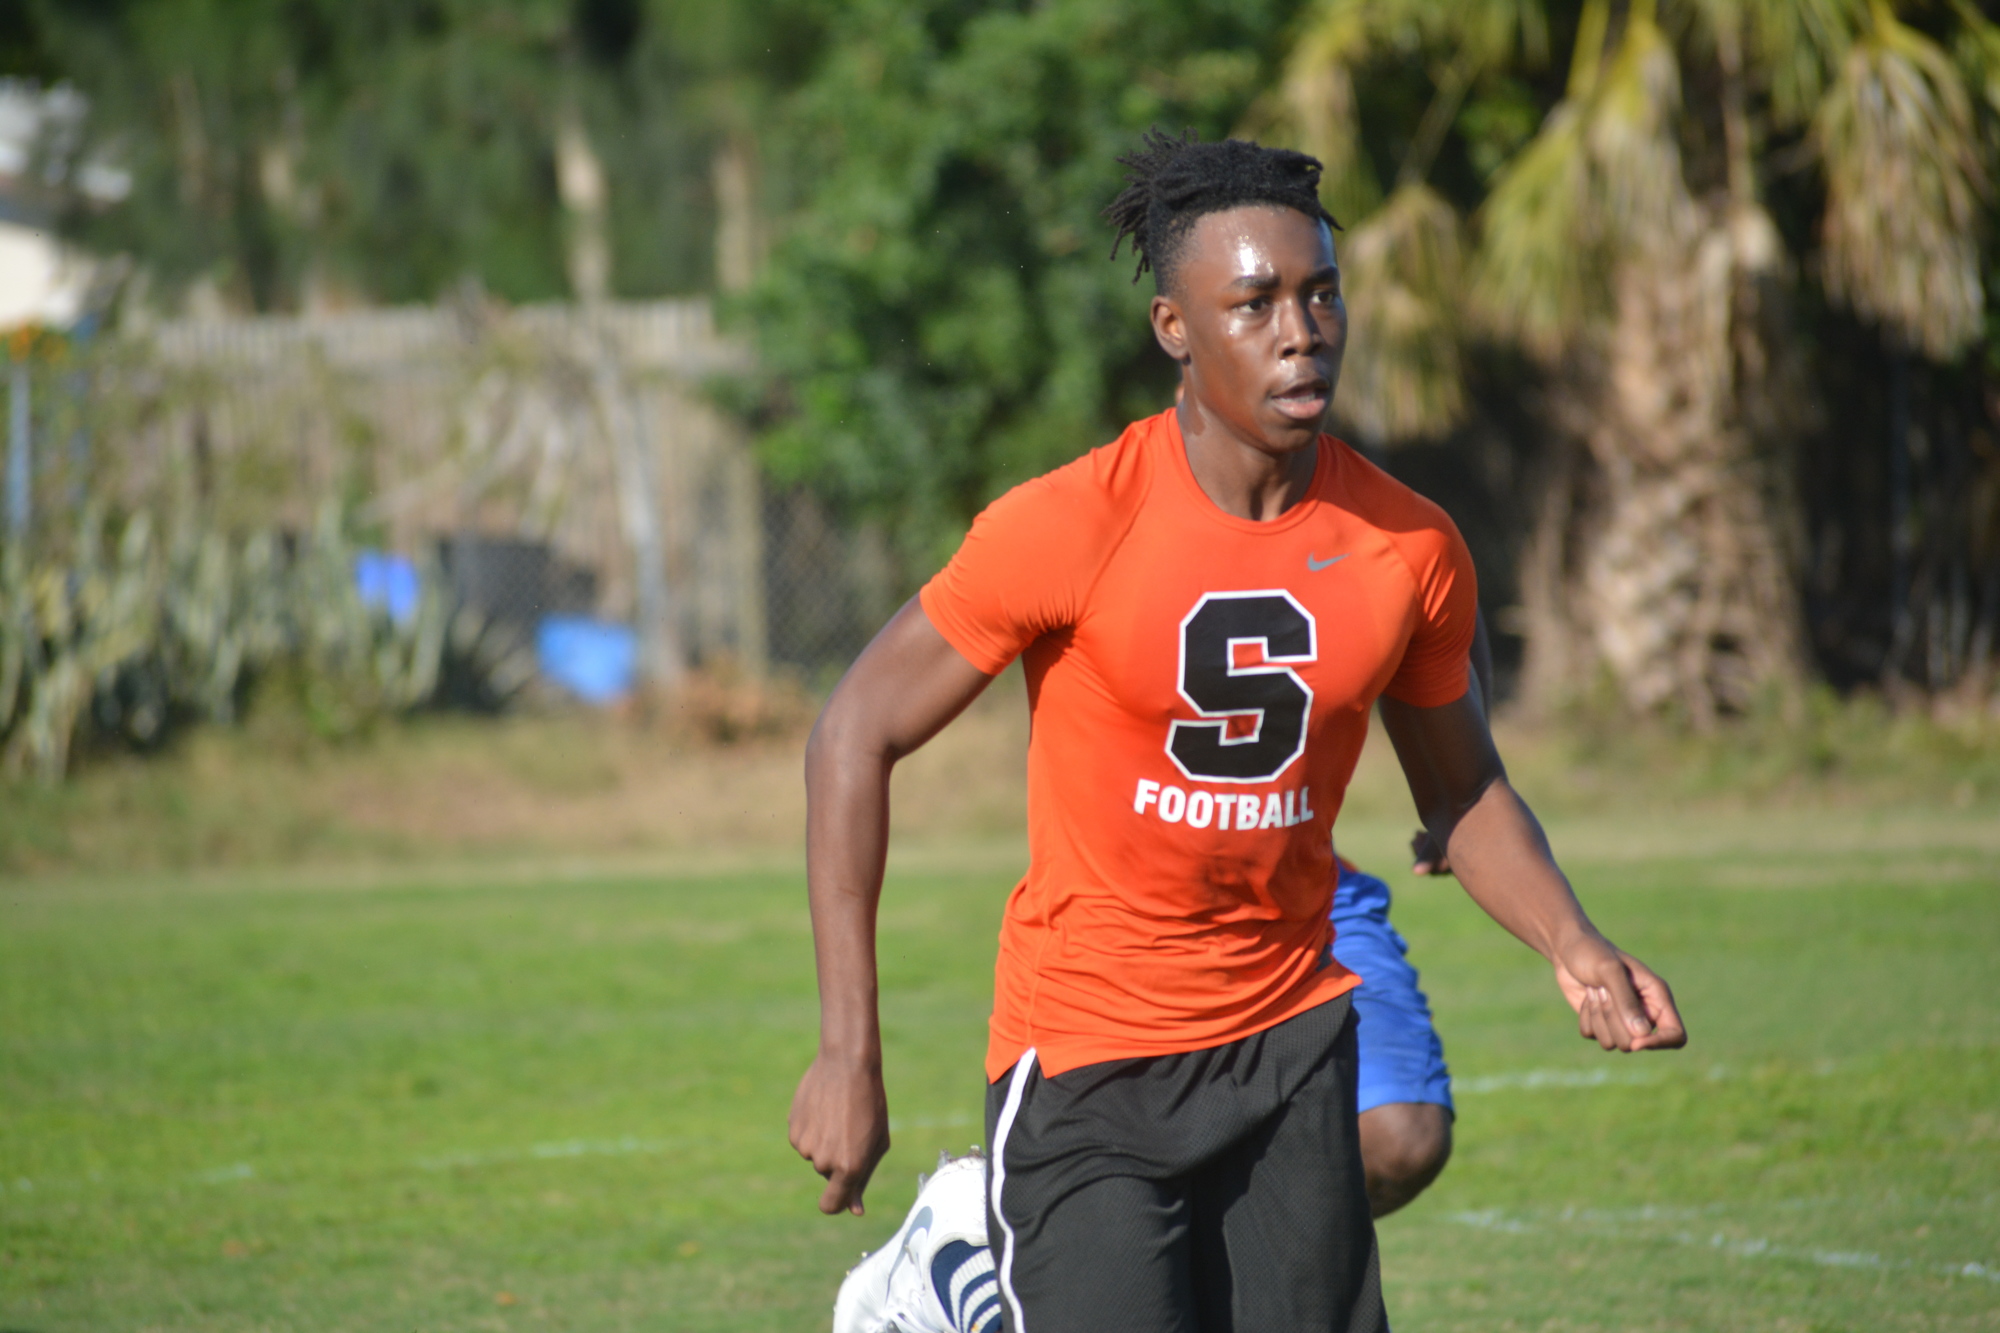 Simeon Waters takes off during sprints. New Sarasota High coach Spencer Hodges tested his team's athleticism on his first day.